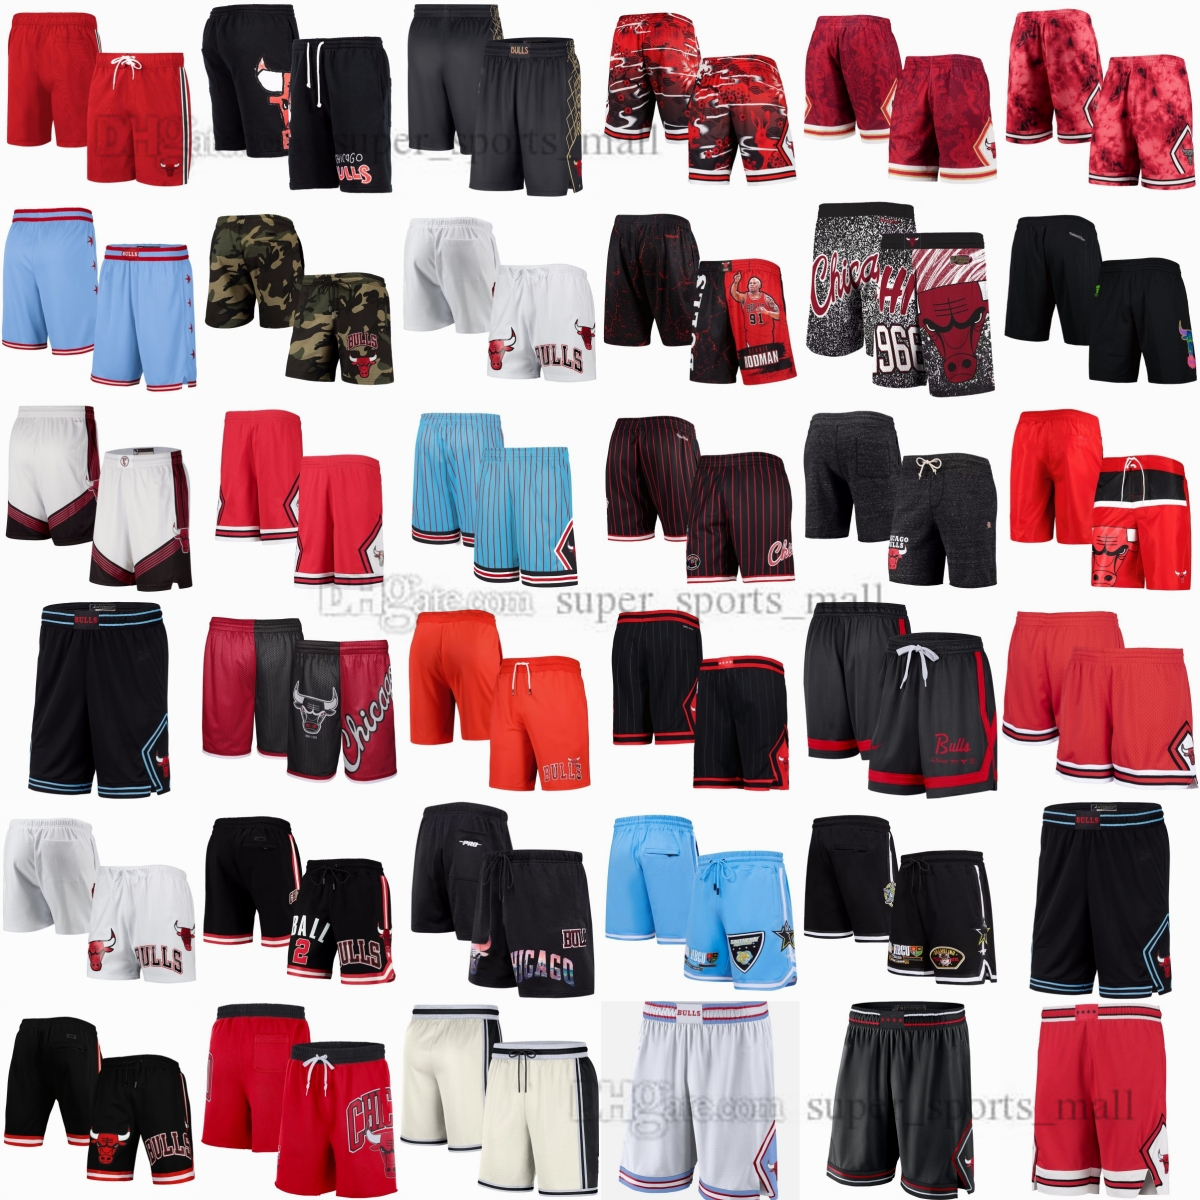 

Custom Team Basketball Shorts Sport Wear Hip Pop Pants With Pocket Zipper Sweatpants Blue White Black Red Purple Stitched Printed Just&Don Short, As picture